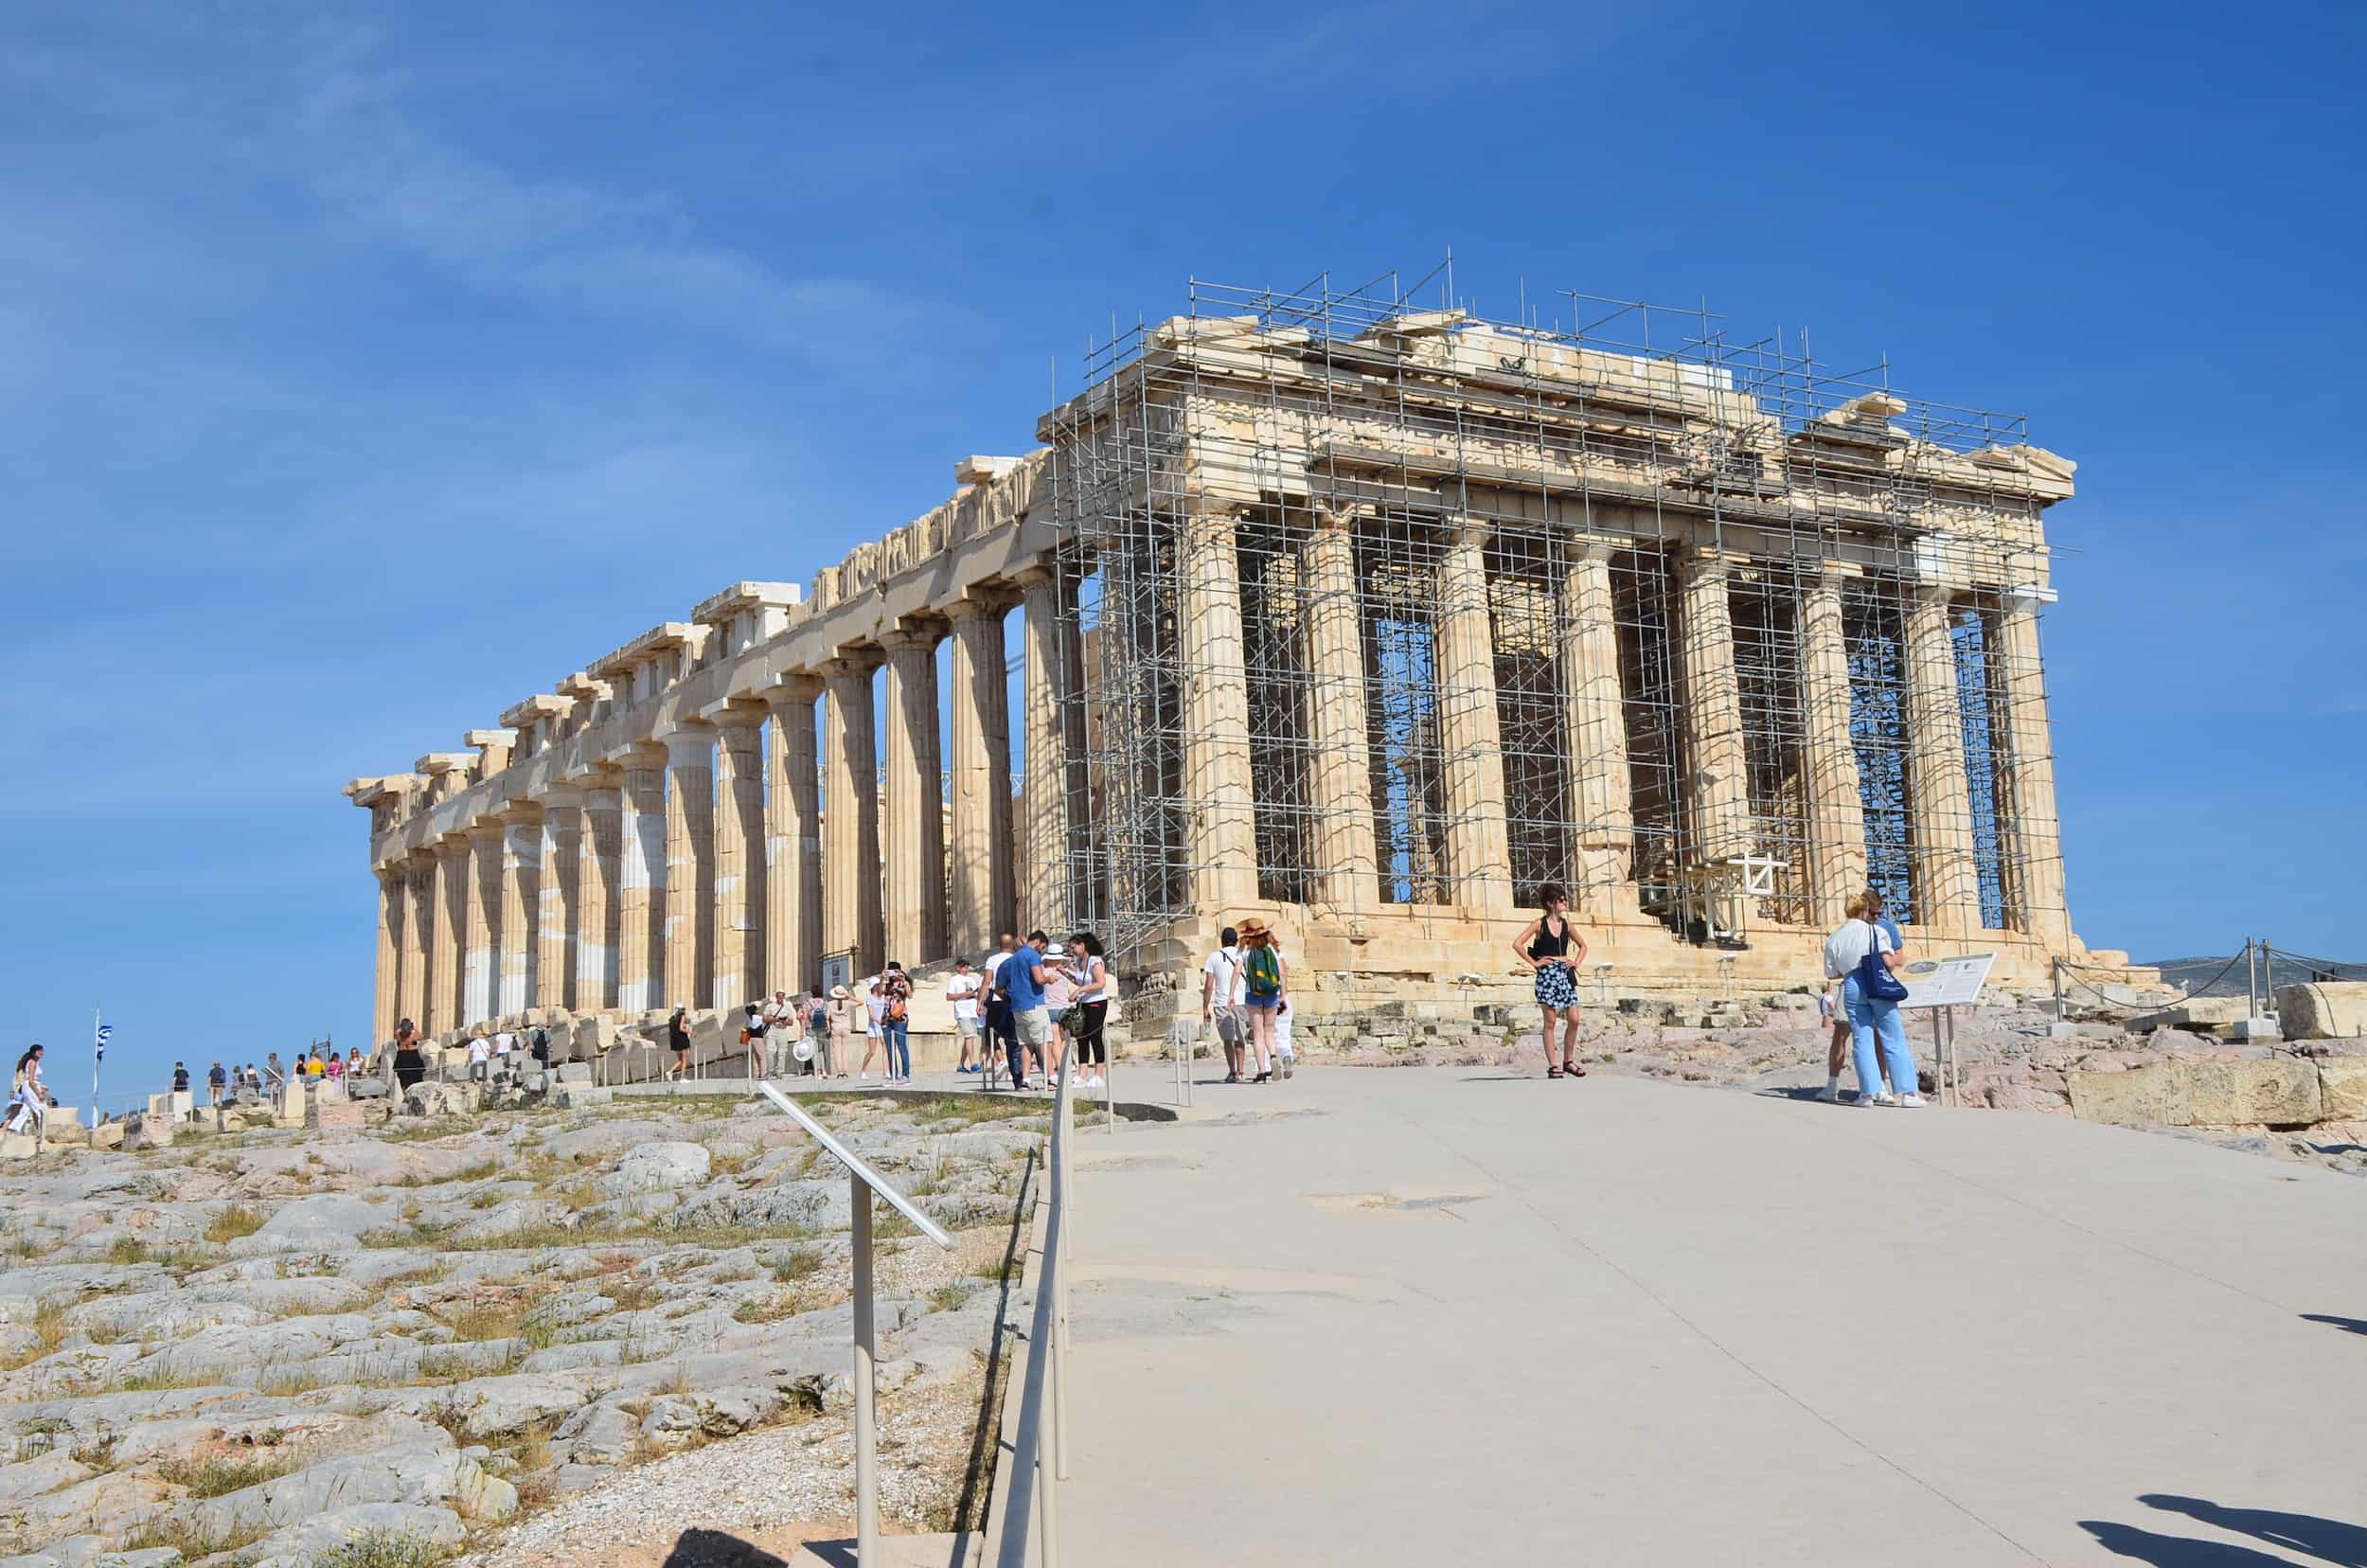 First glimpse of the Parthenon